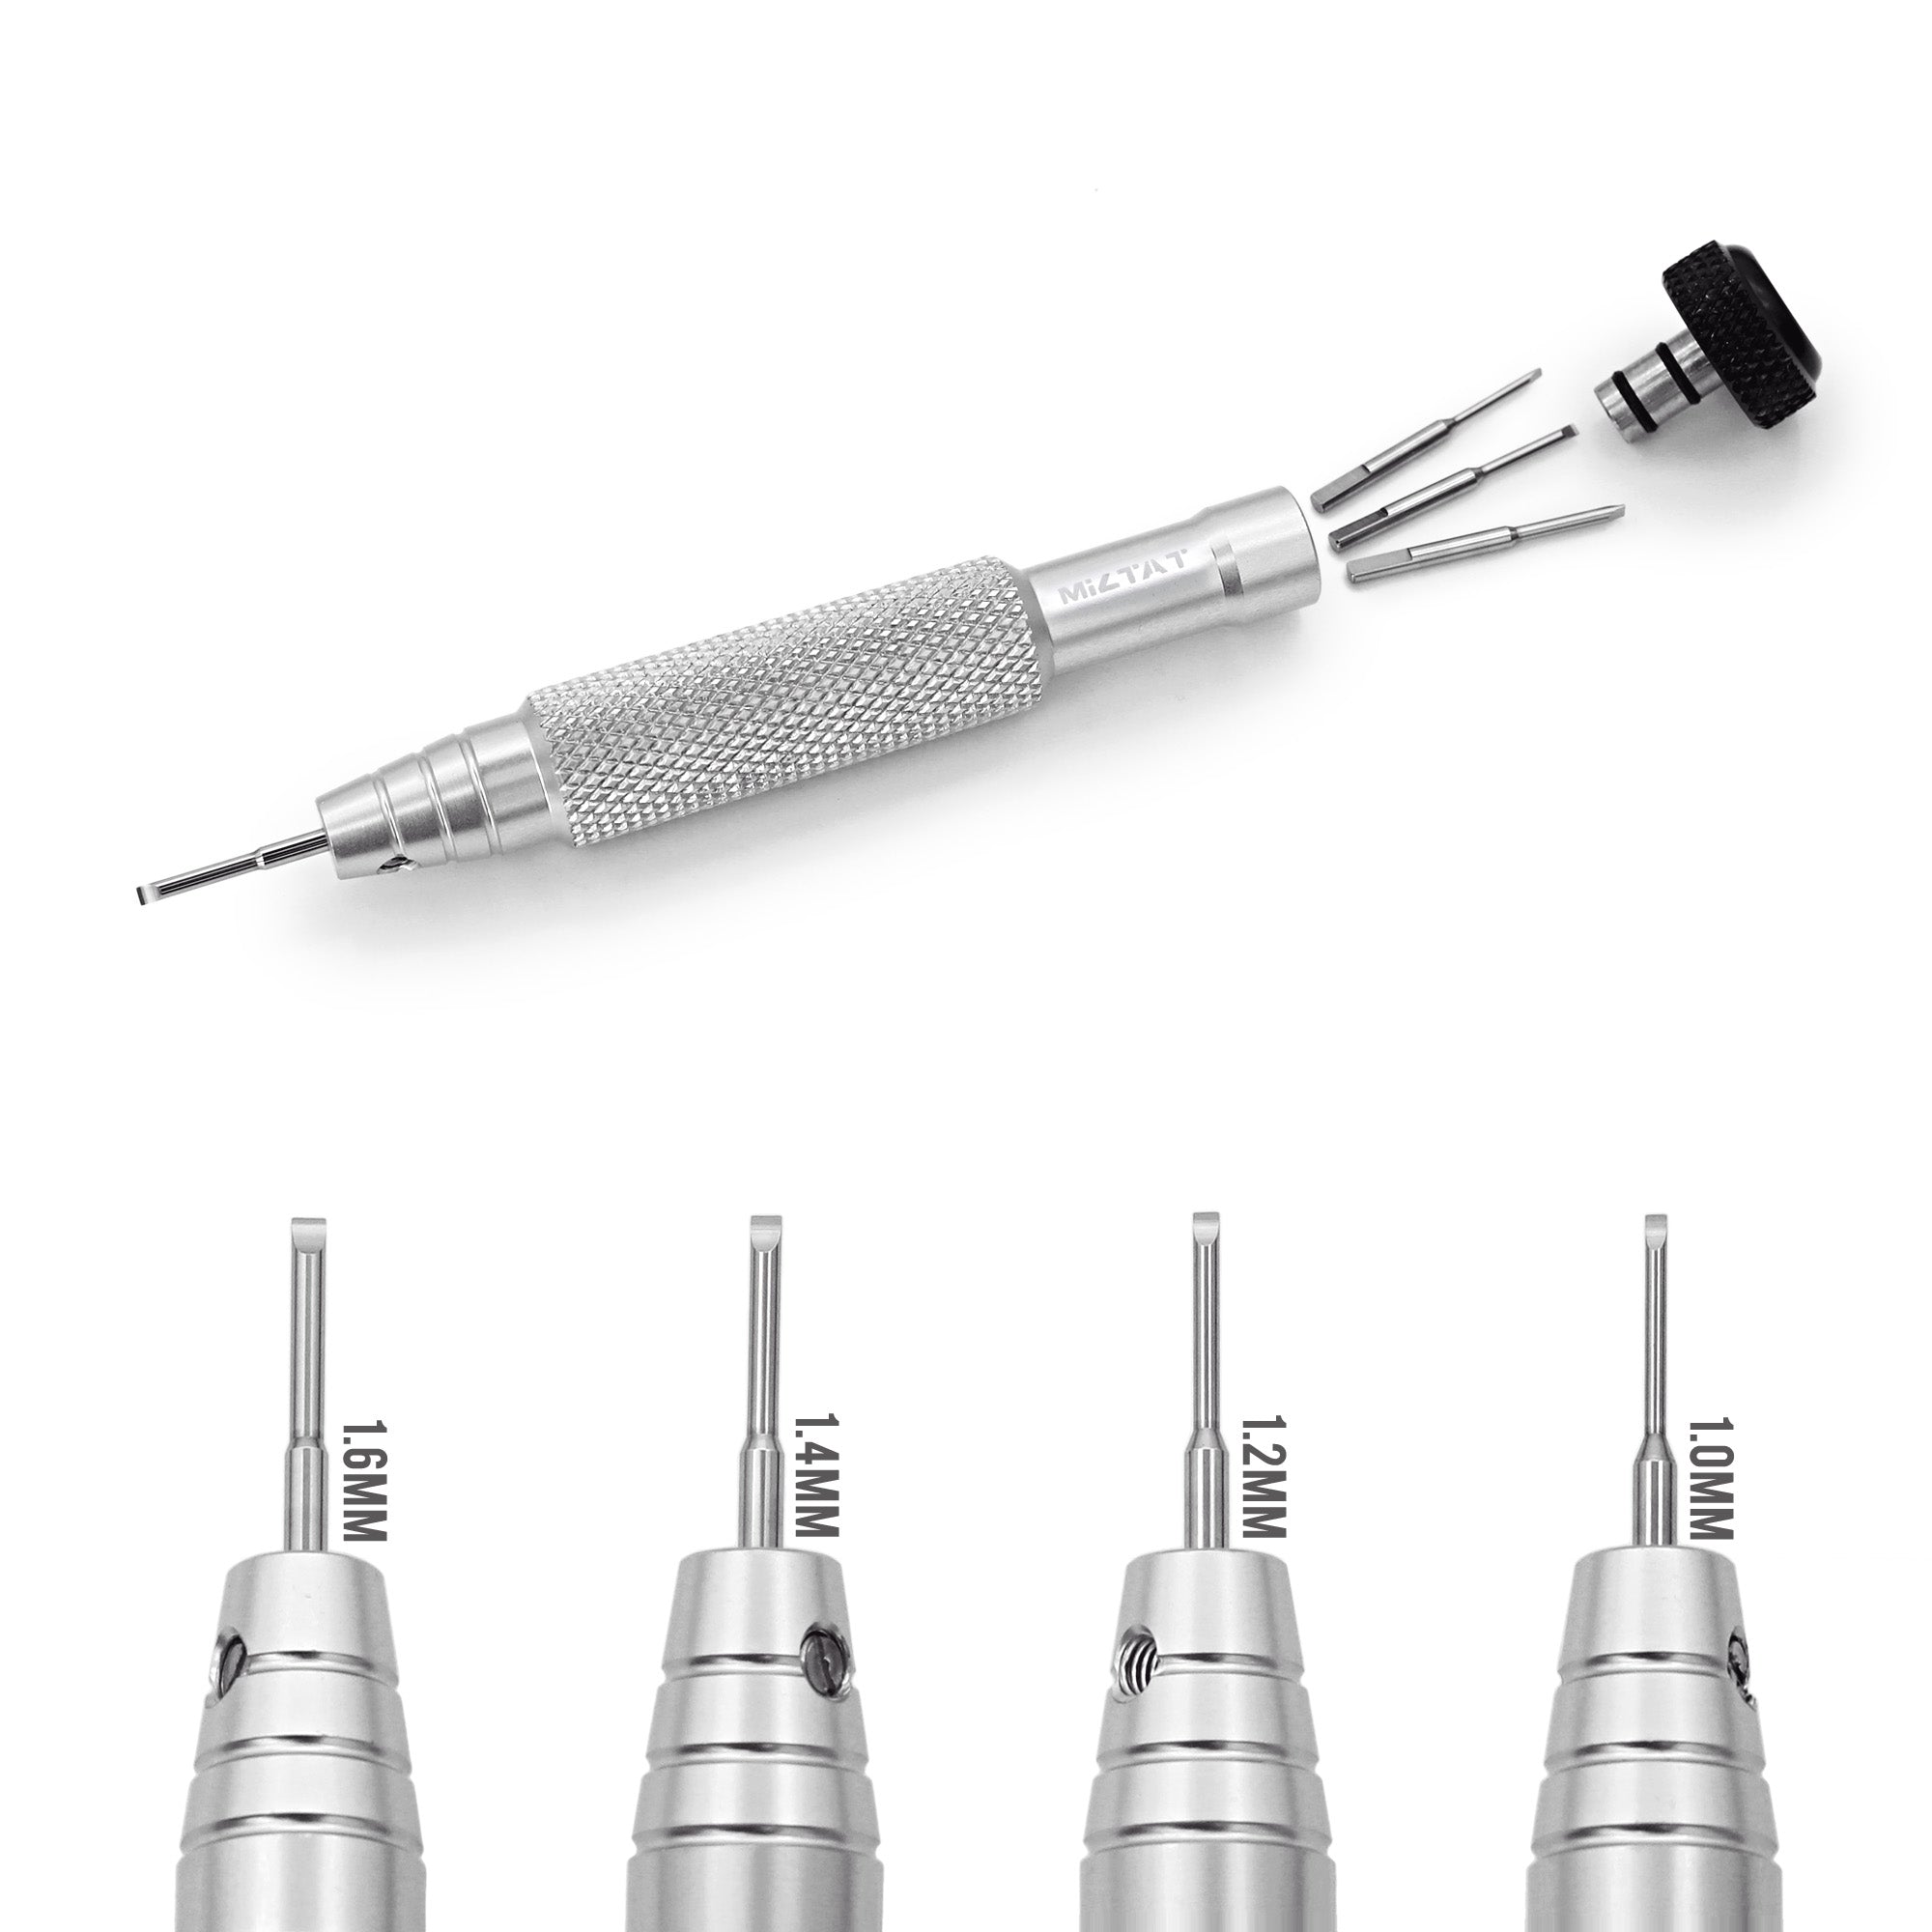 Japan Made Precision Screwdriver Cut-Out type for Watch Bracelet adjustment - 4 interchangeable blades